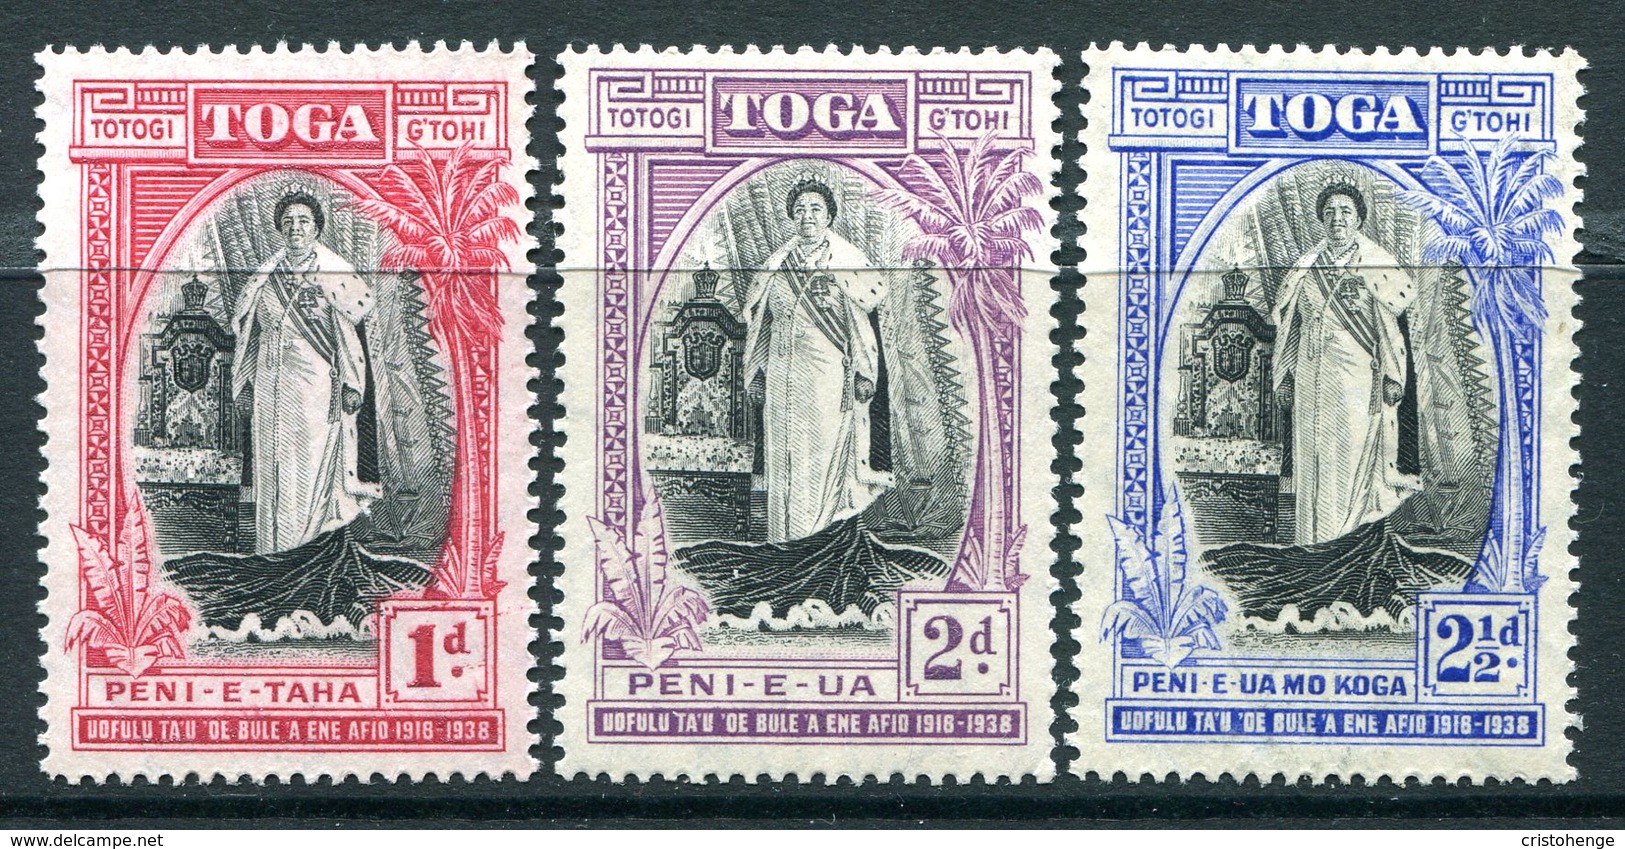 Tonga 1938 20th Anniversary Of Queen Salote's Accession Set HM (SG 71-73) - Light Gum Toning - Tonga (...-1970)